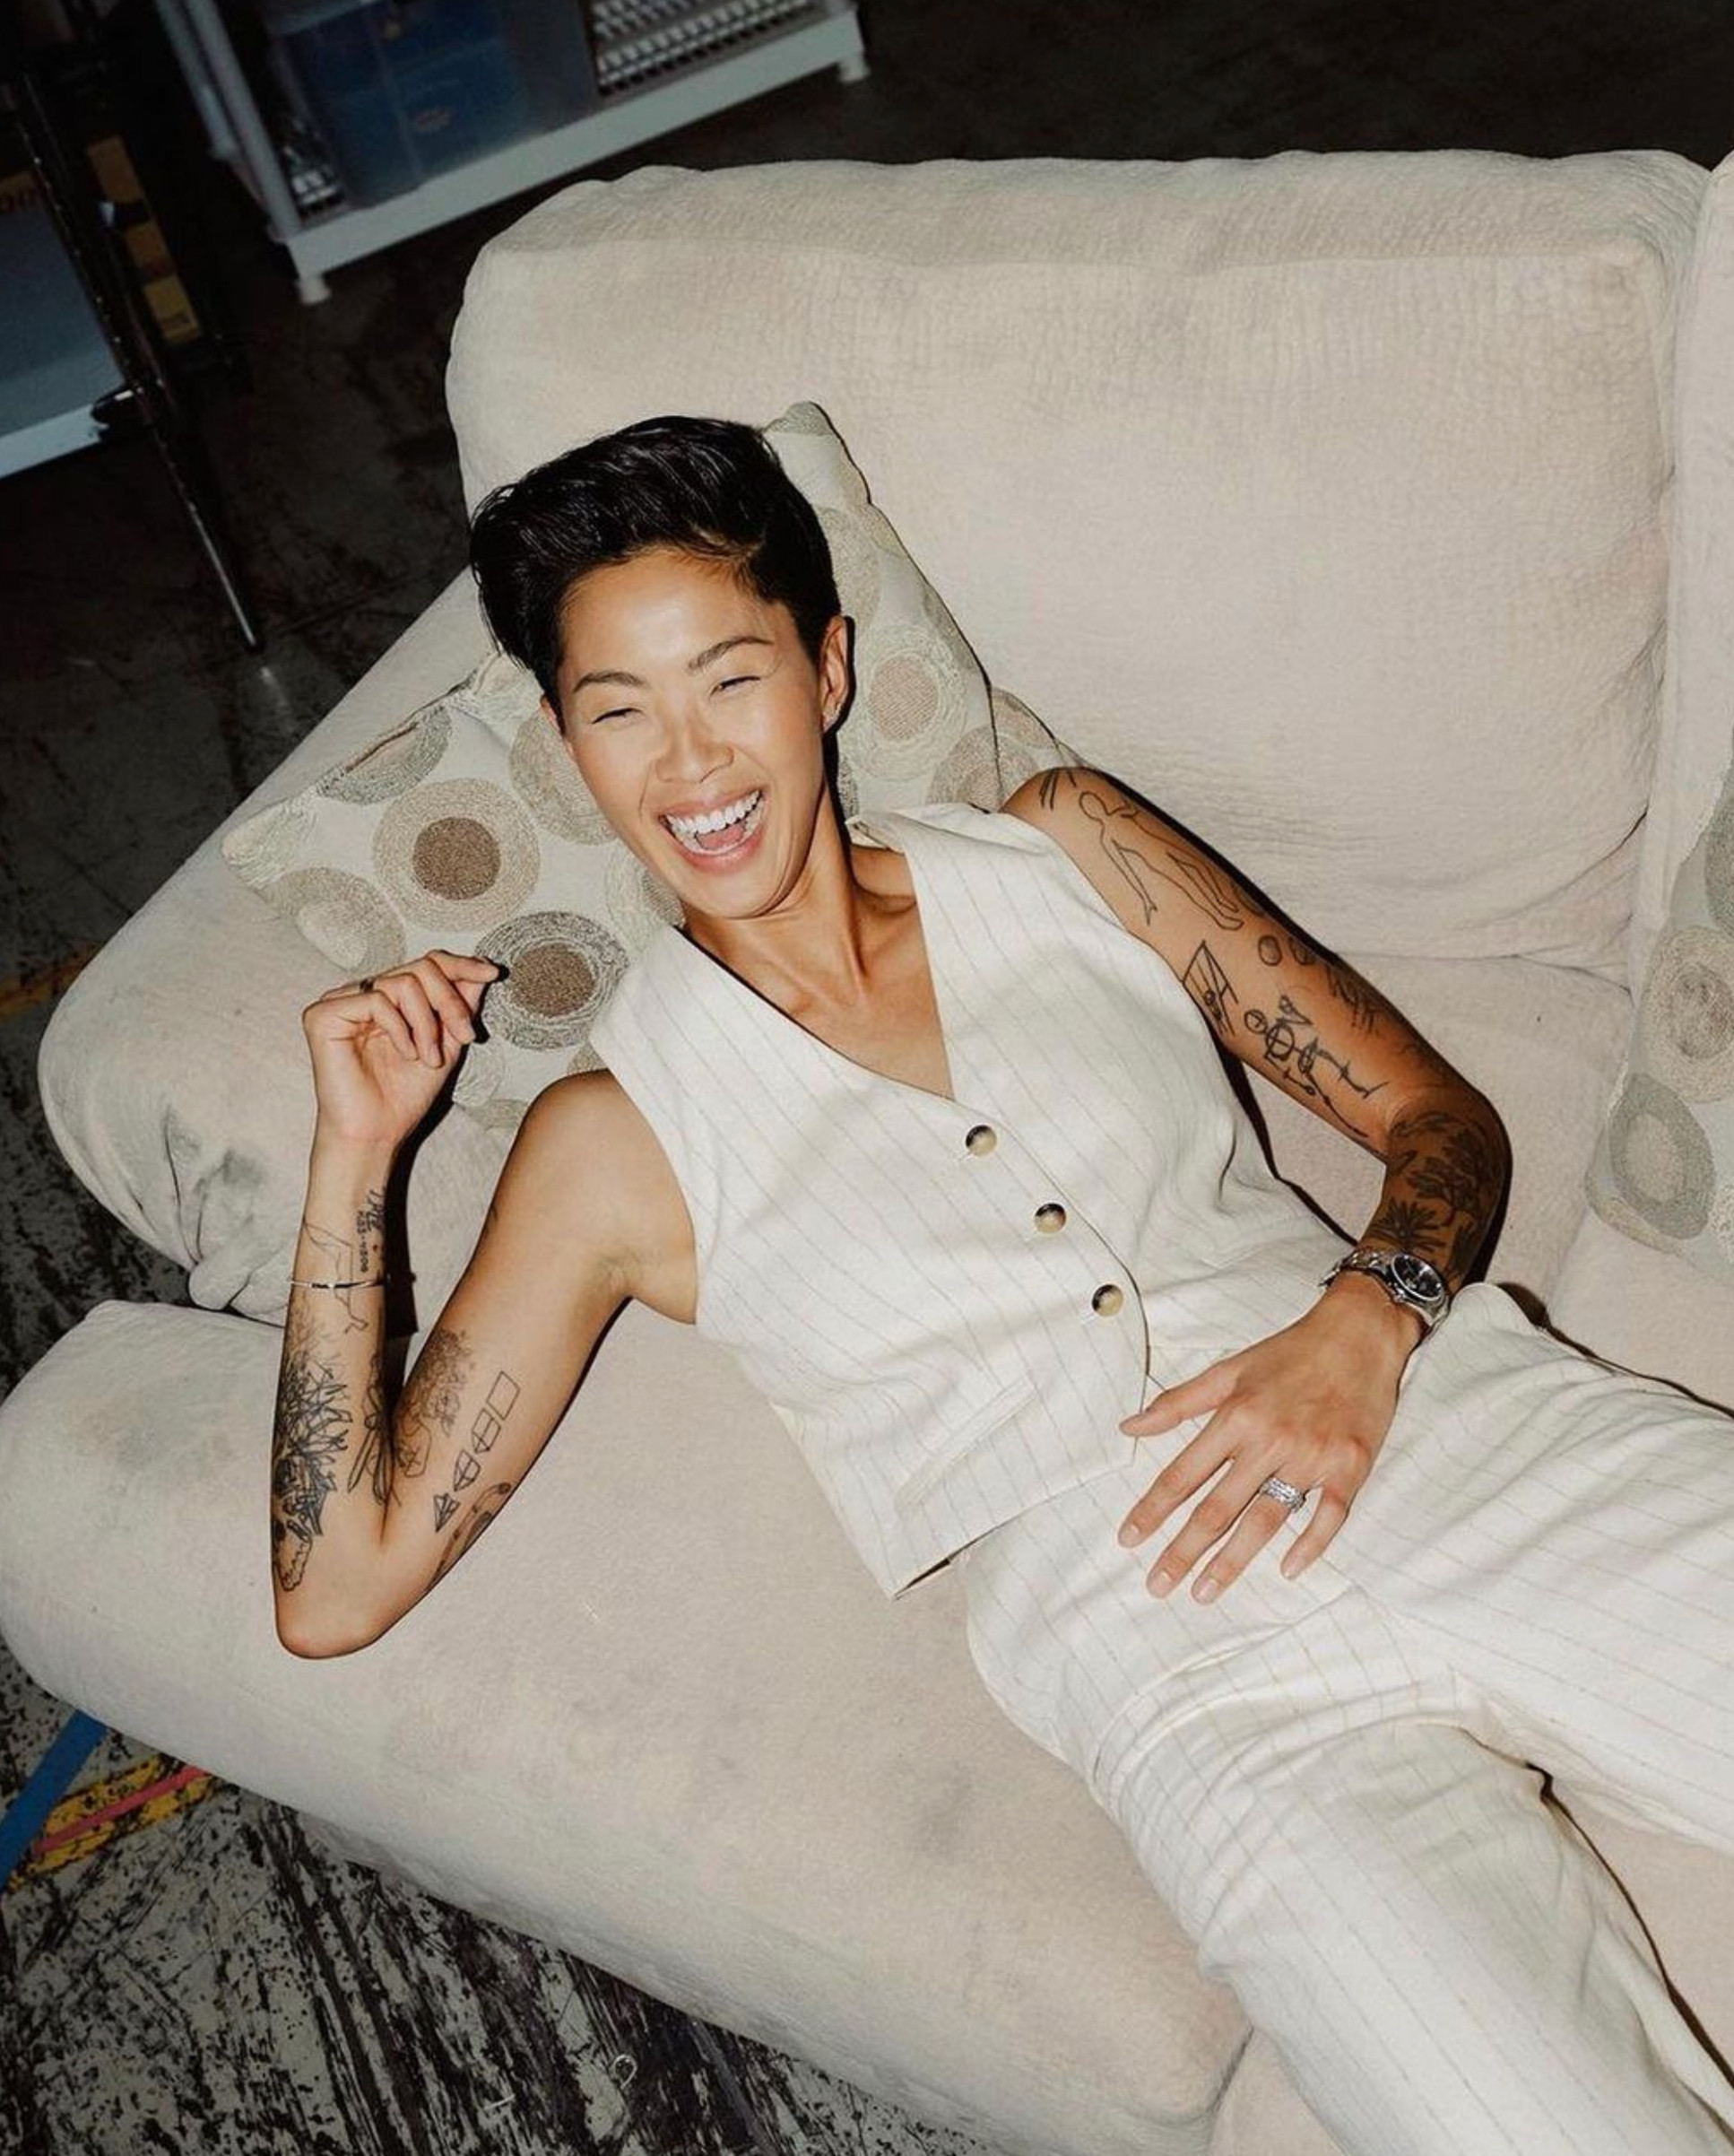 Kristen Kish is a talented chef on the rise. Photo: @kristenlkish/Instagram